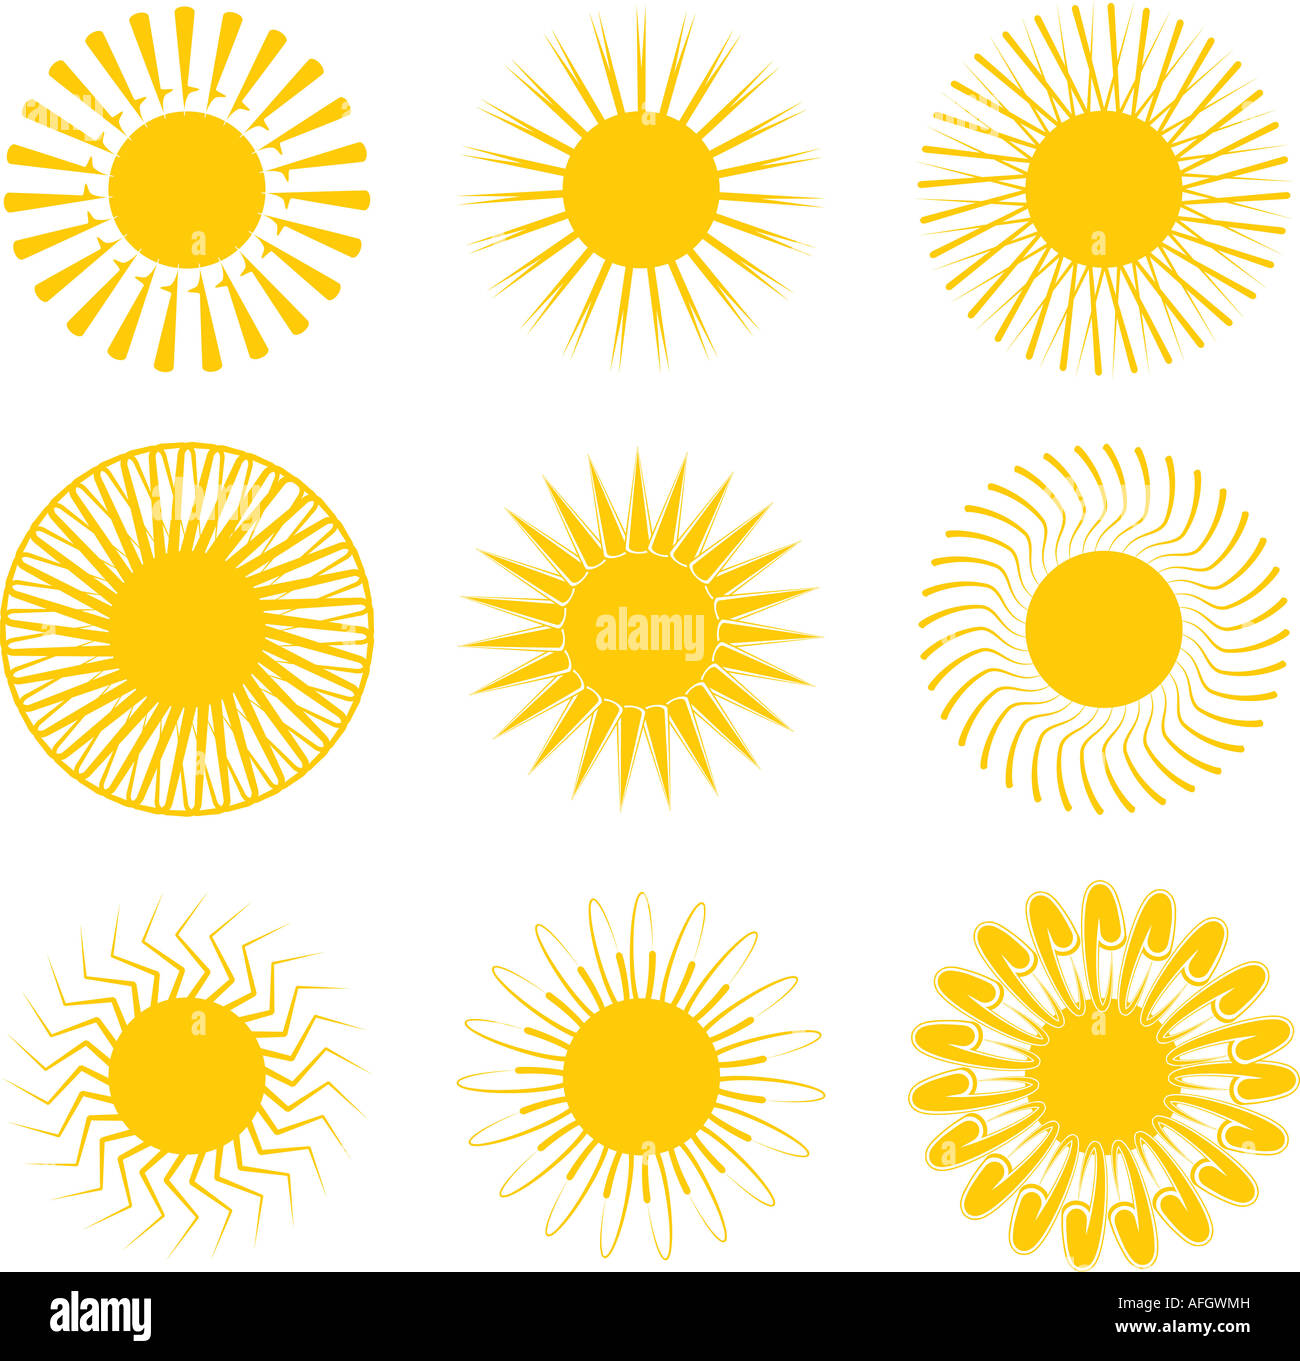 Sun illustrations with nine different variations with an inca influence Stock Photo